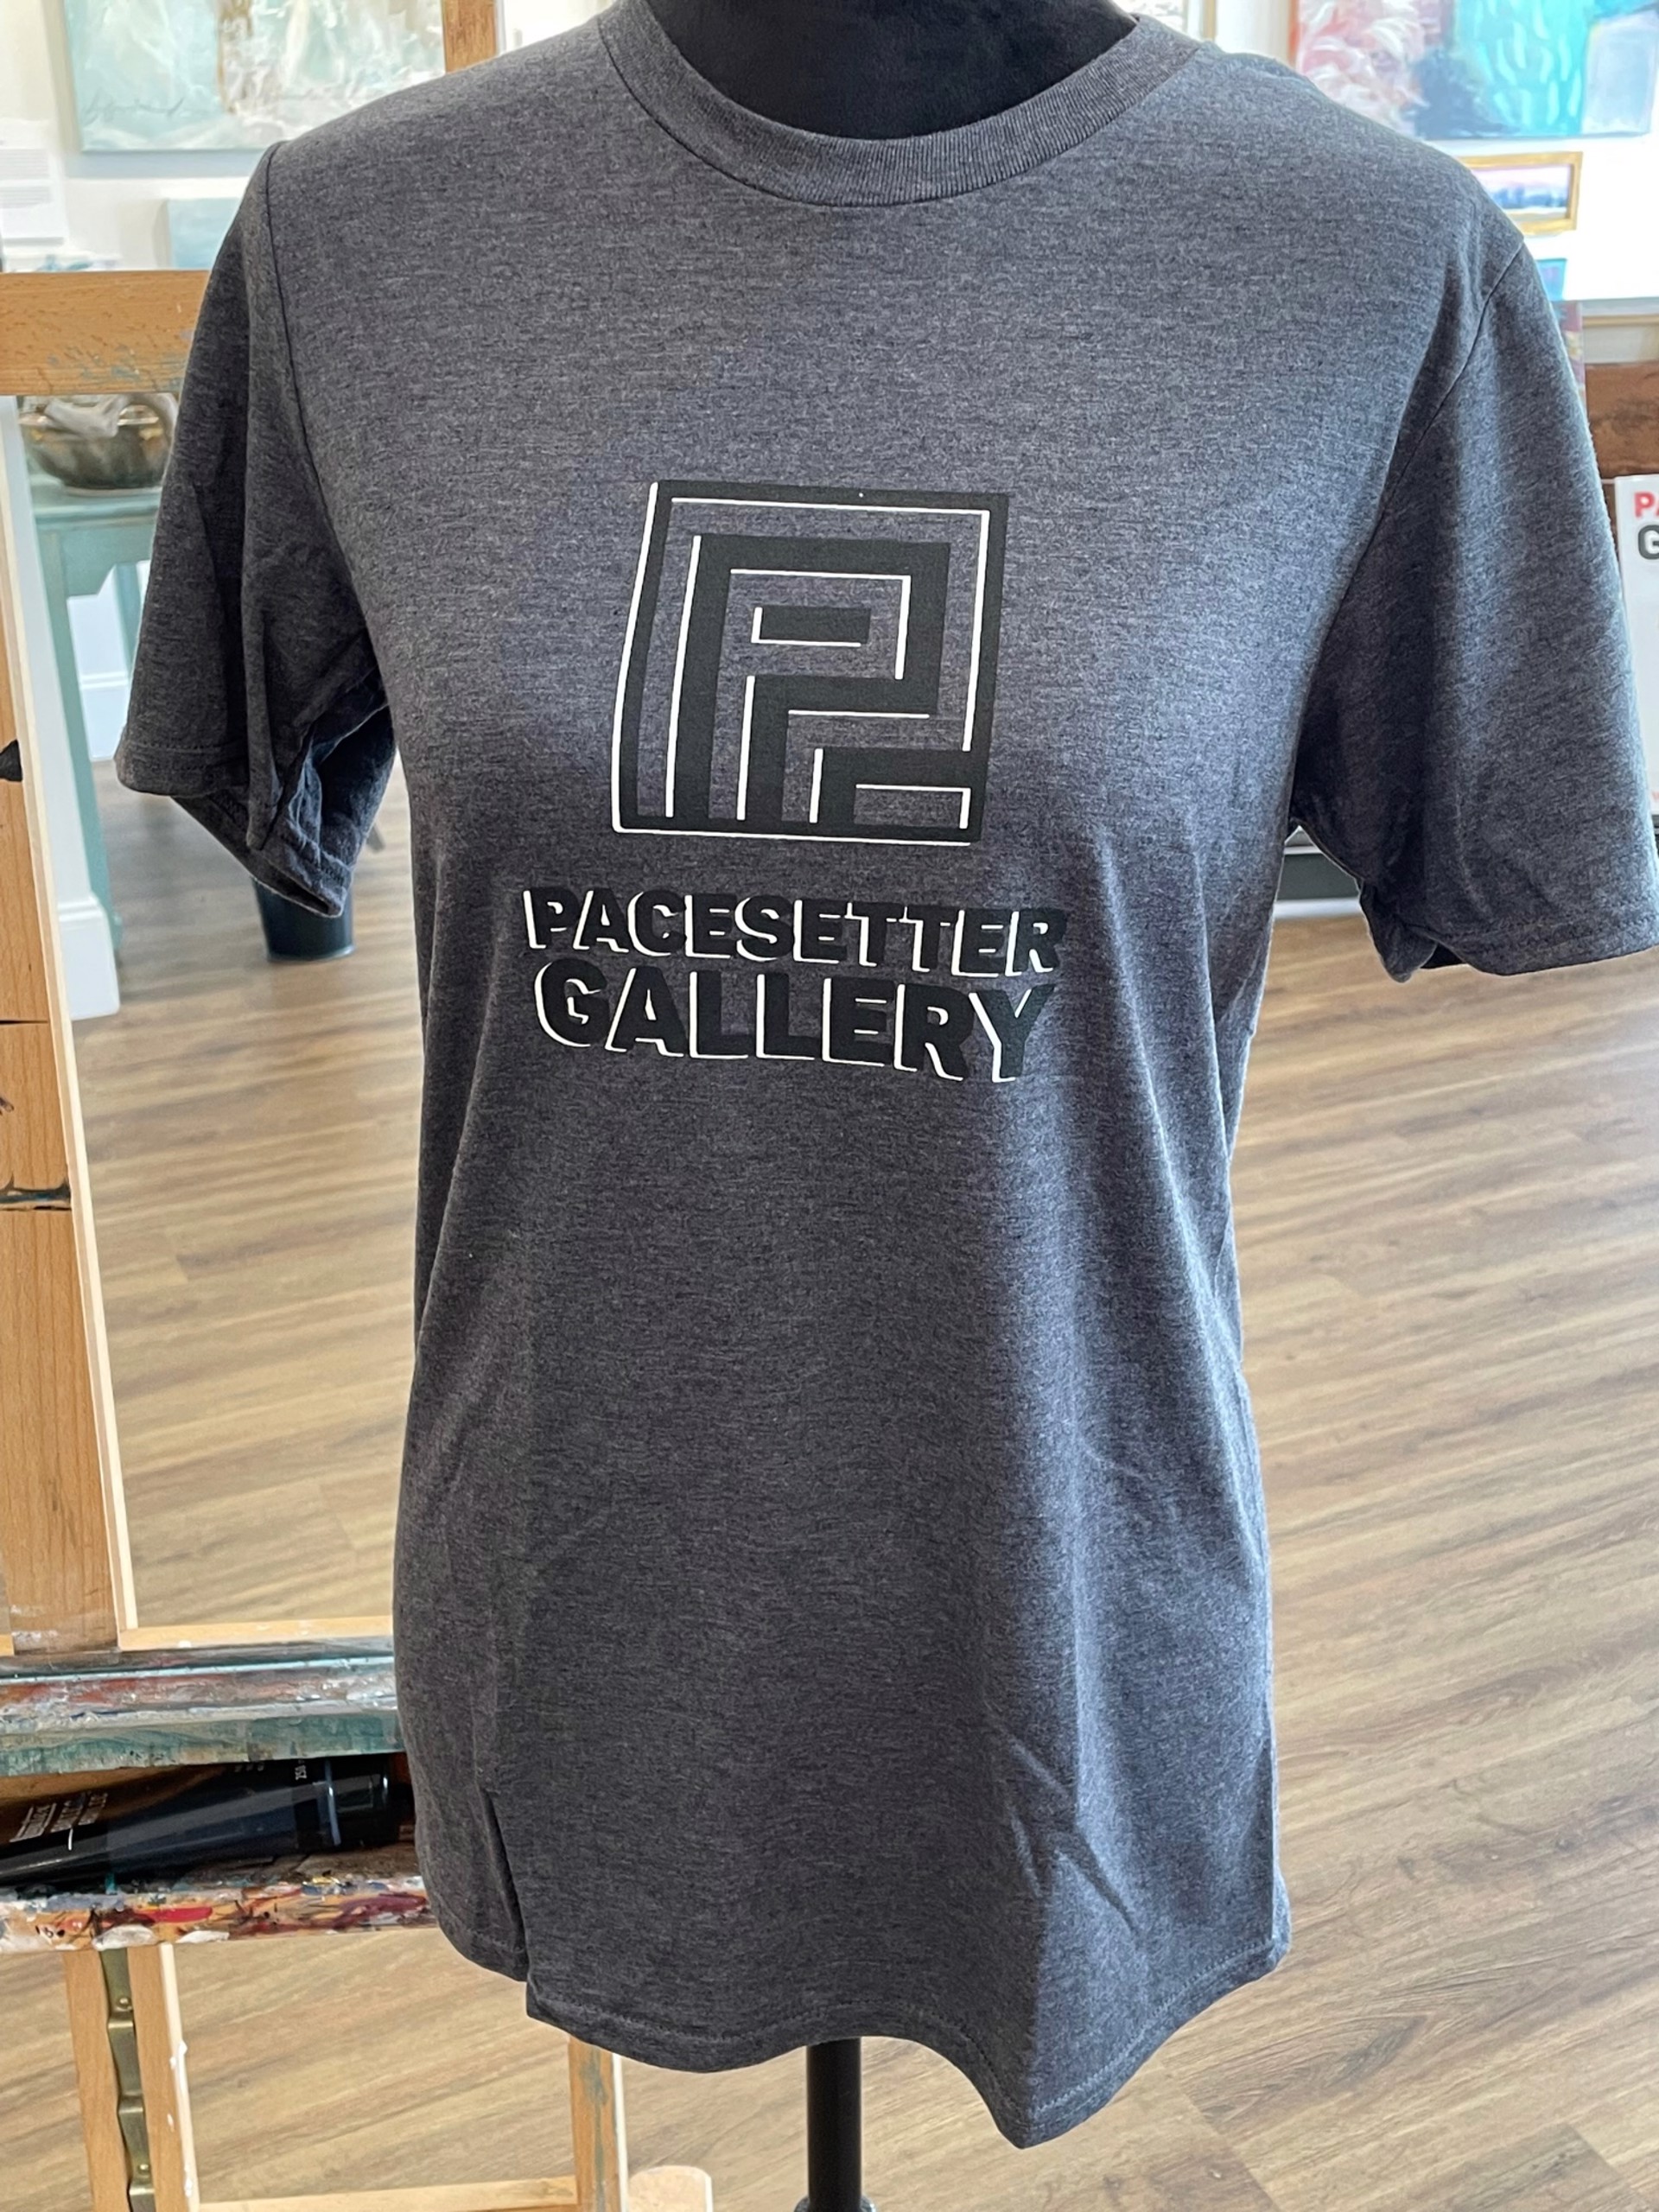 Pacesetter Gallery Unisex T-Shirt (Small) by Pacesetter Merchandise